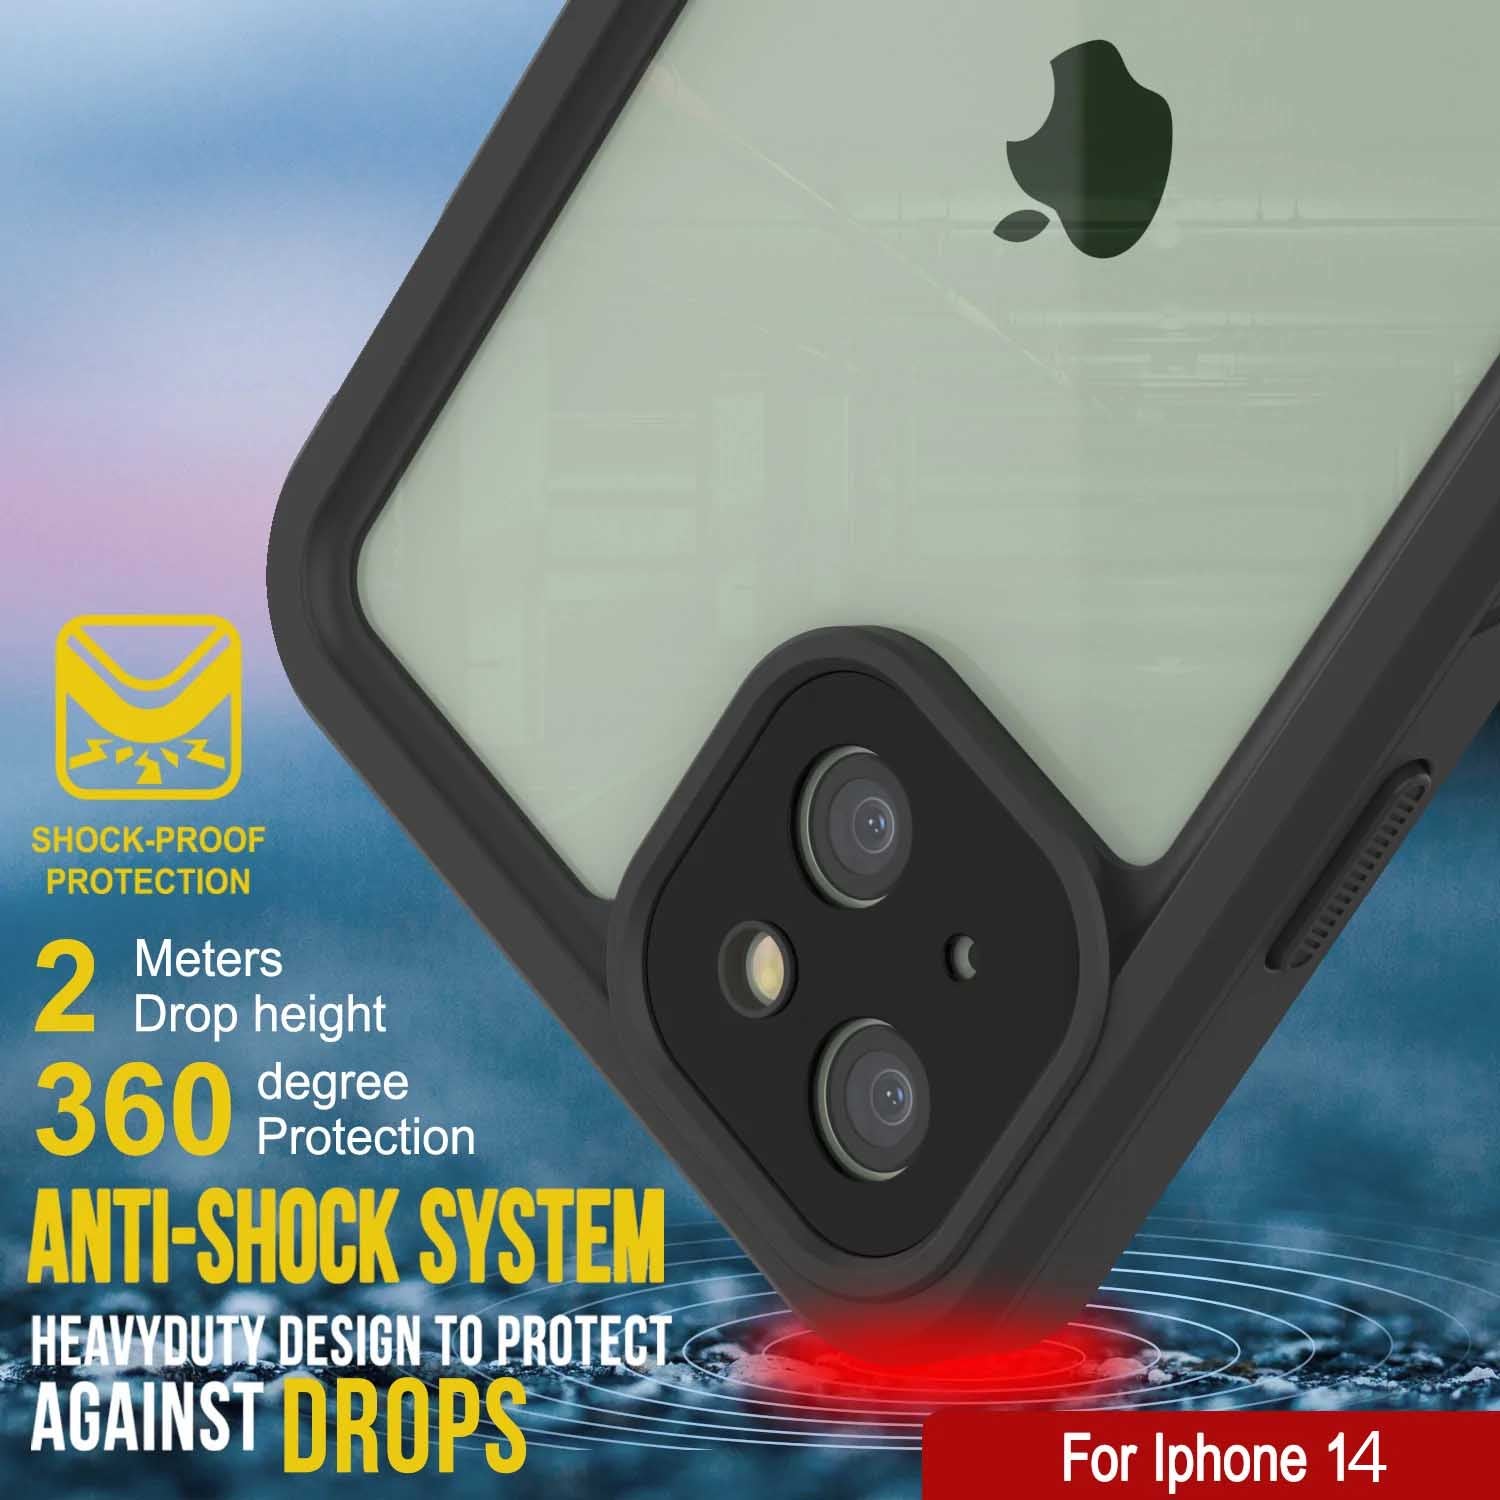 iPhone 14  Waterproof Case, Punkcase [Extreme Series] Armor Cover W/ Built In Screen Protector [Black]